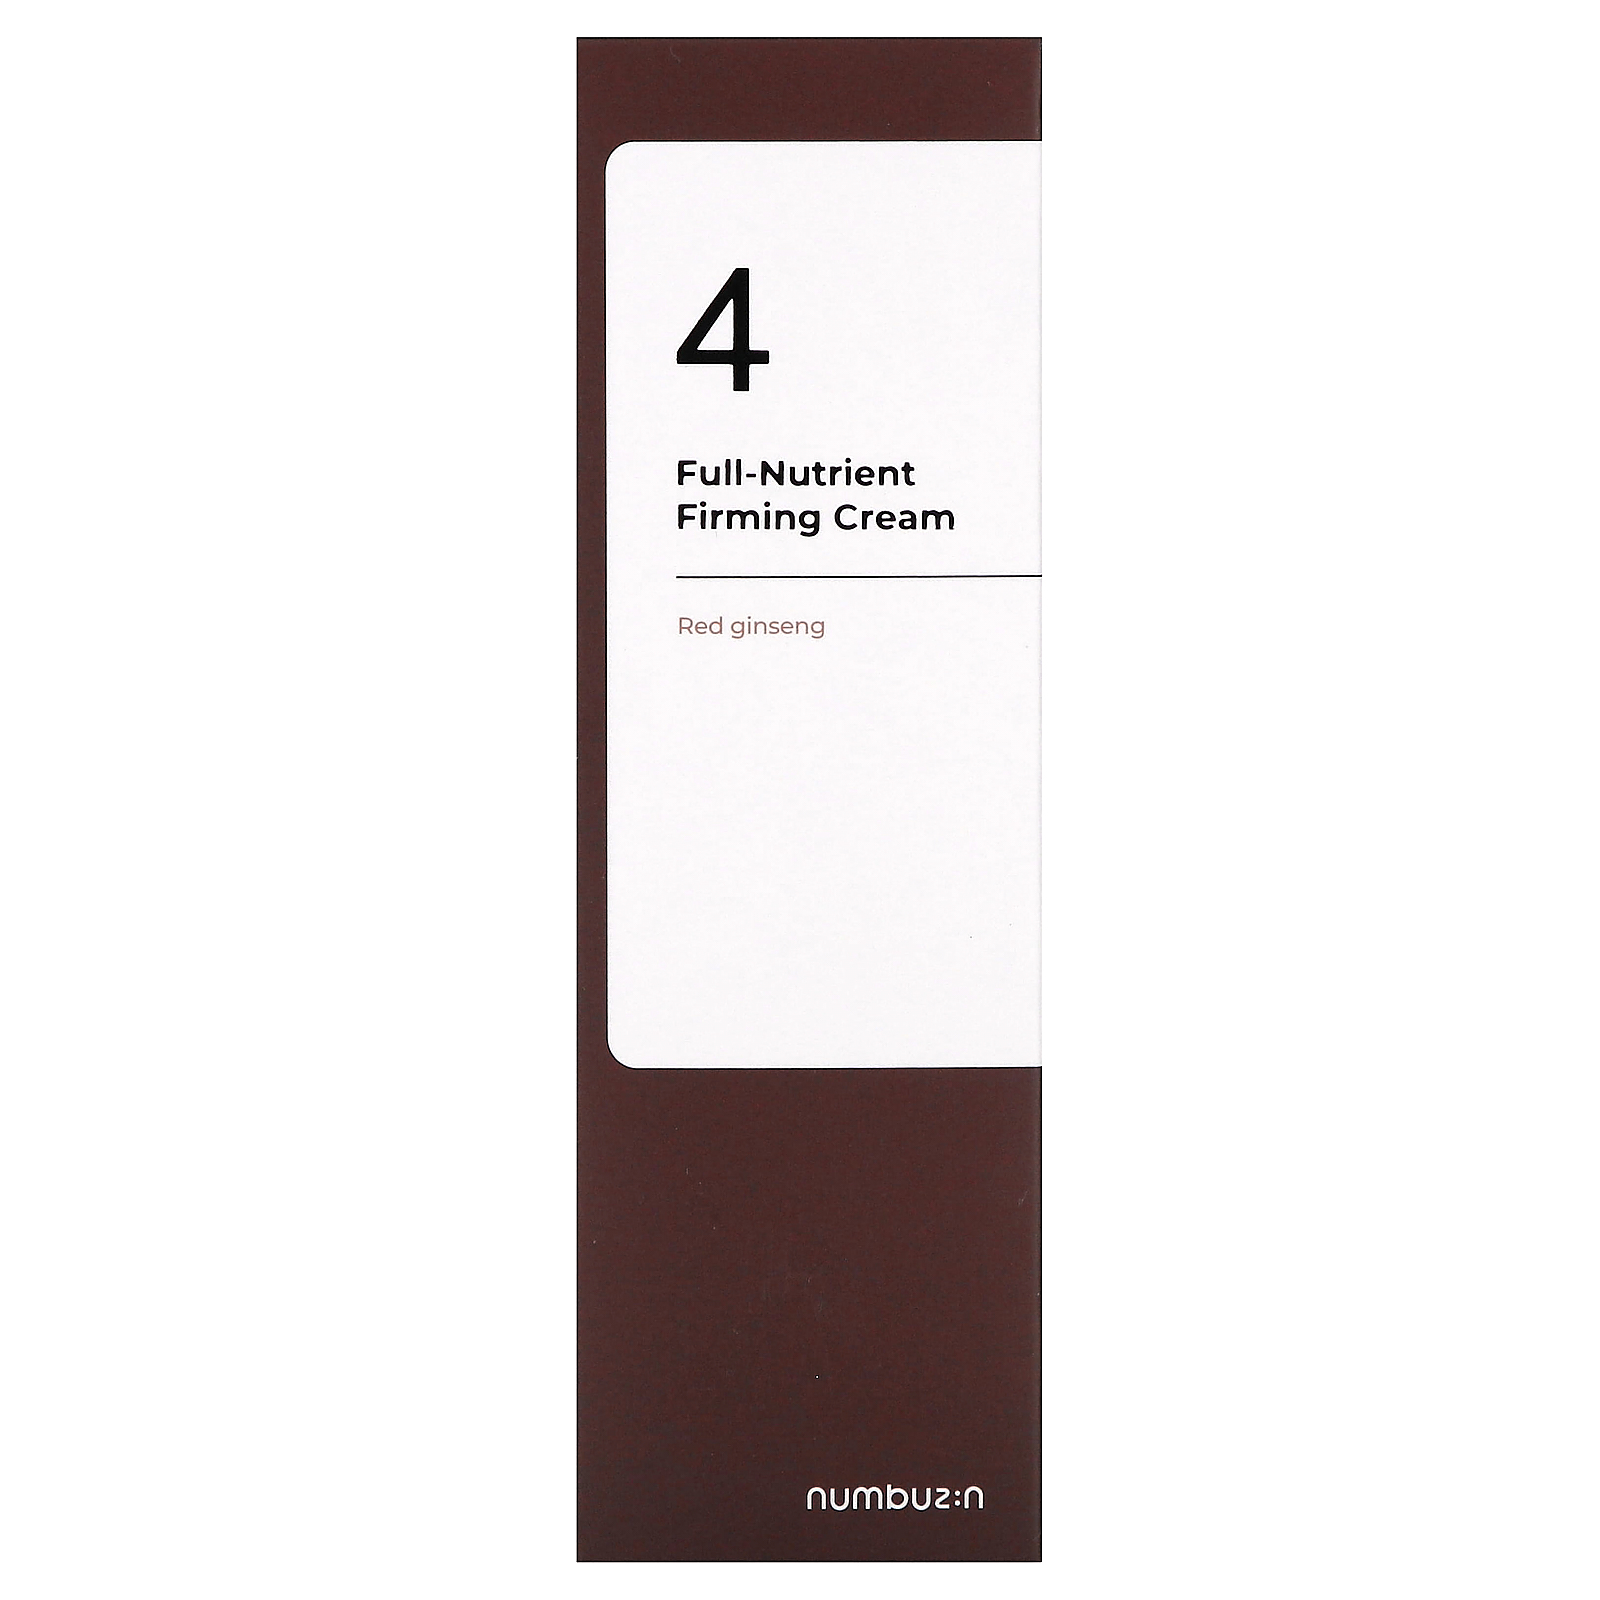 Numbuzin No.4 Full-Nutrient Firming Cream, Red Ginseng, 2.02 fl oz (60 ml) - image 2 of 2